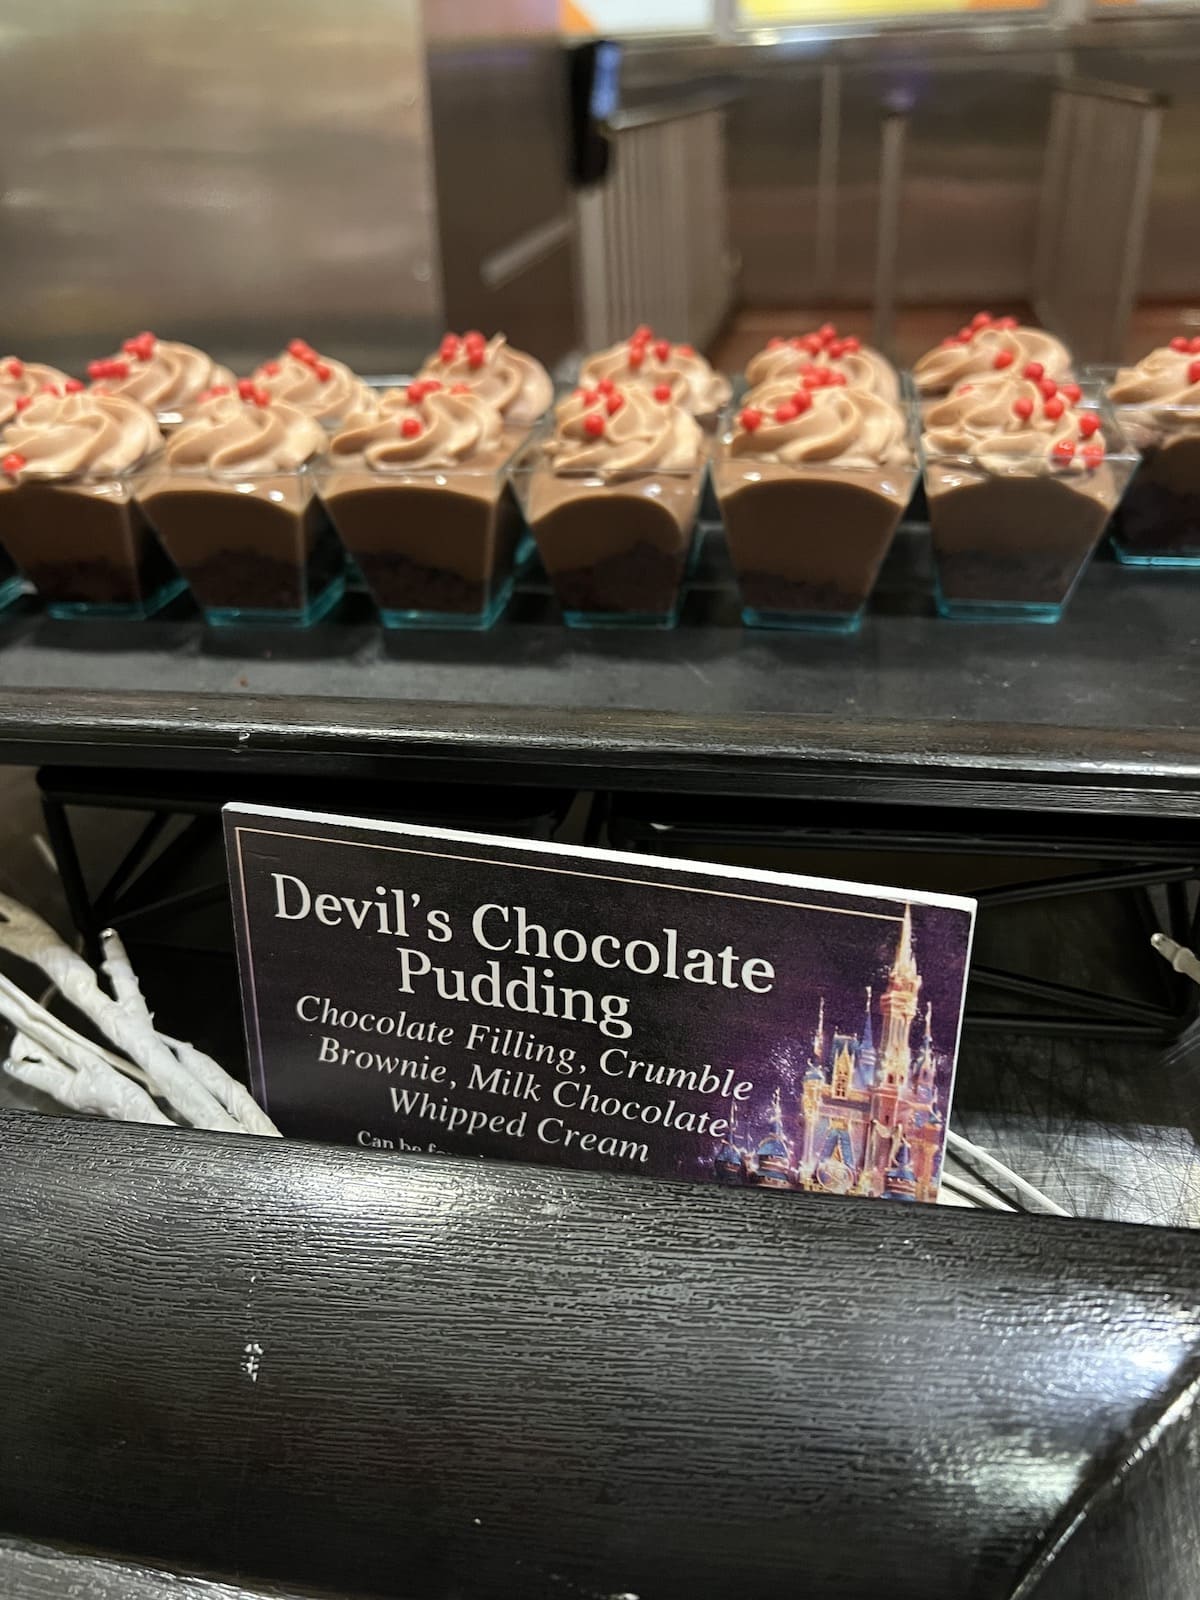 Disney Enchantment Treats and Seats - Disney Fireworks Dessert Party Review and the Answer to the Question: "what time does the fireworks start at disney world?"